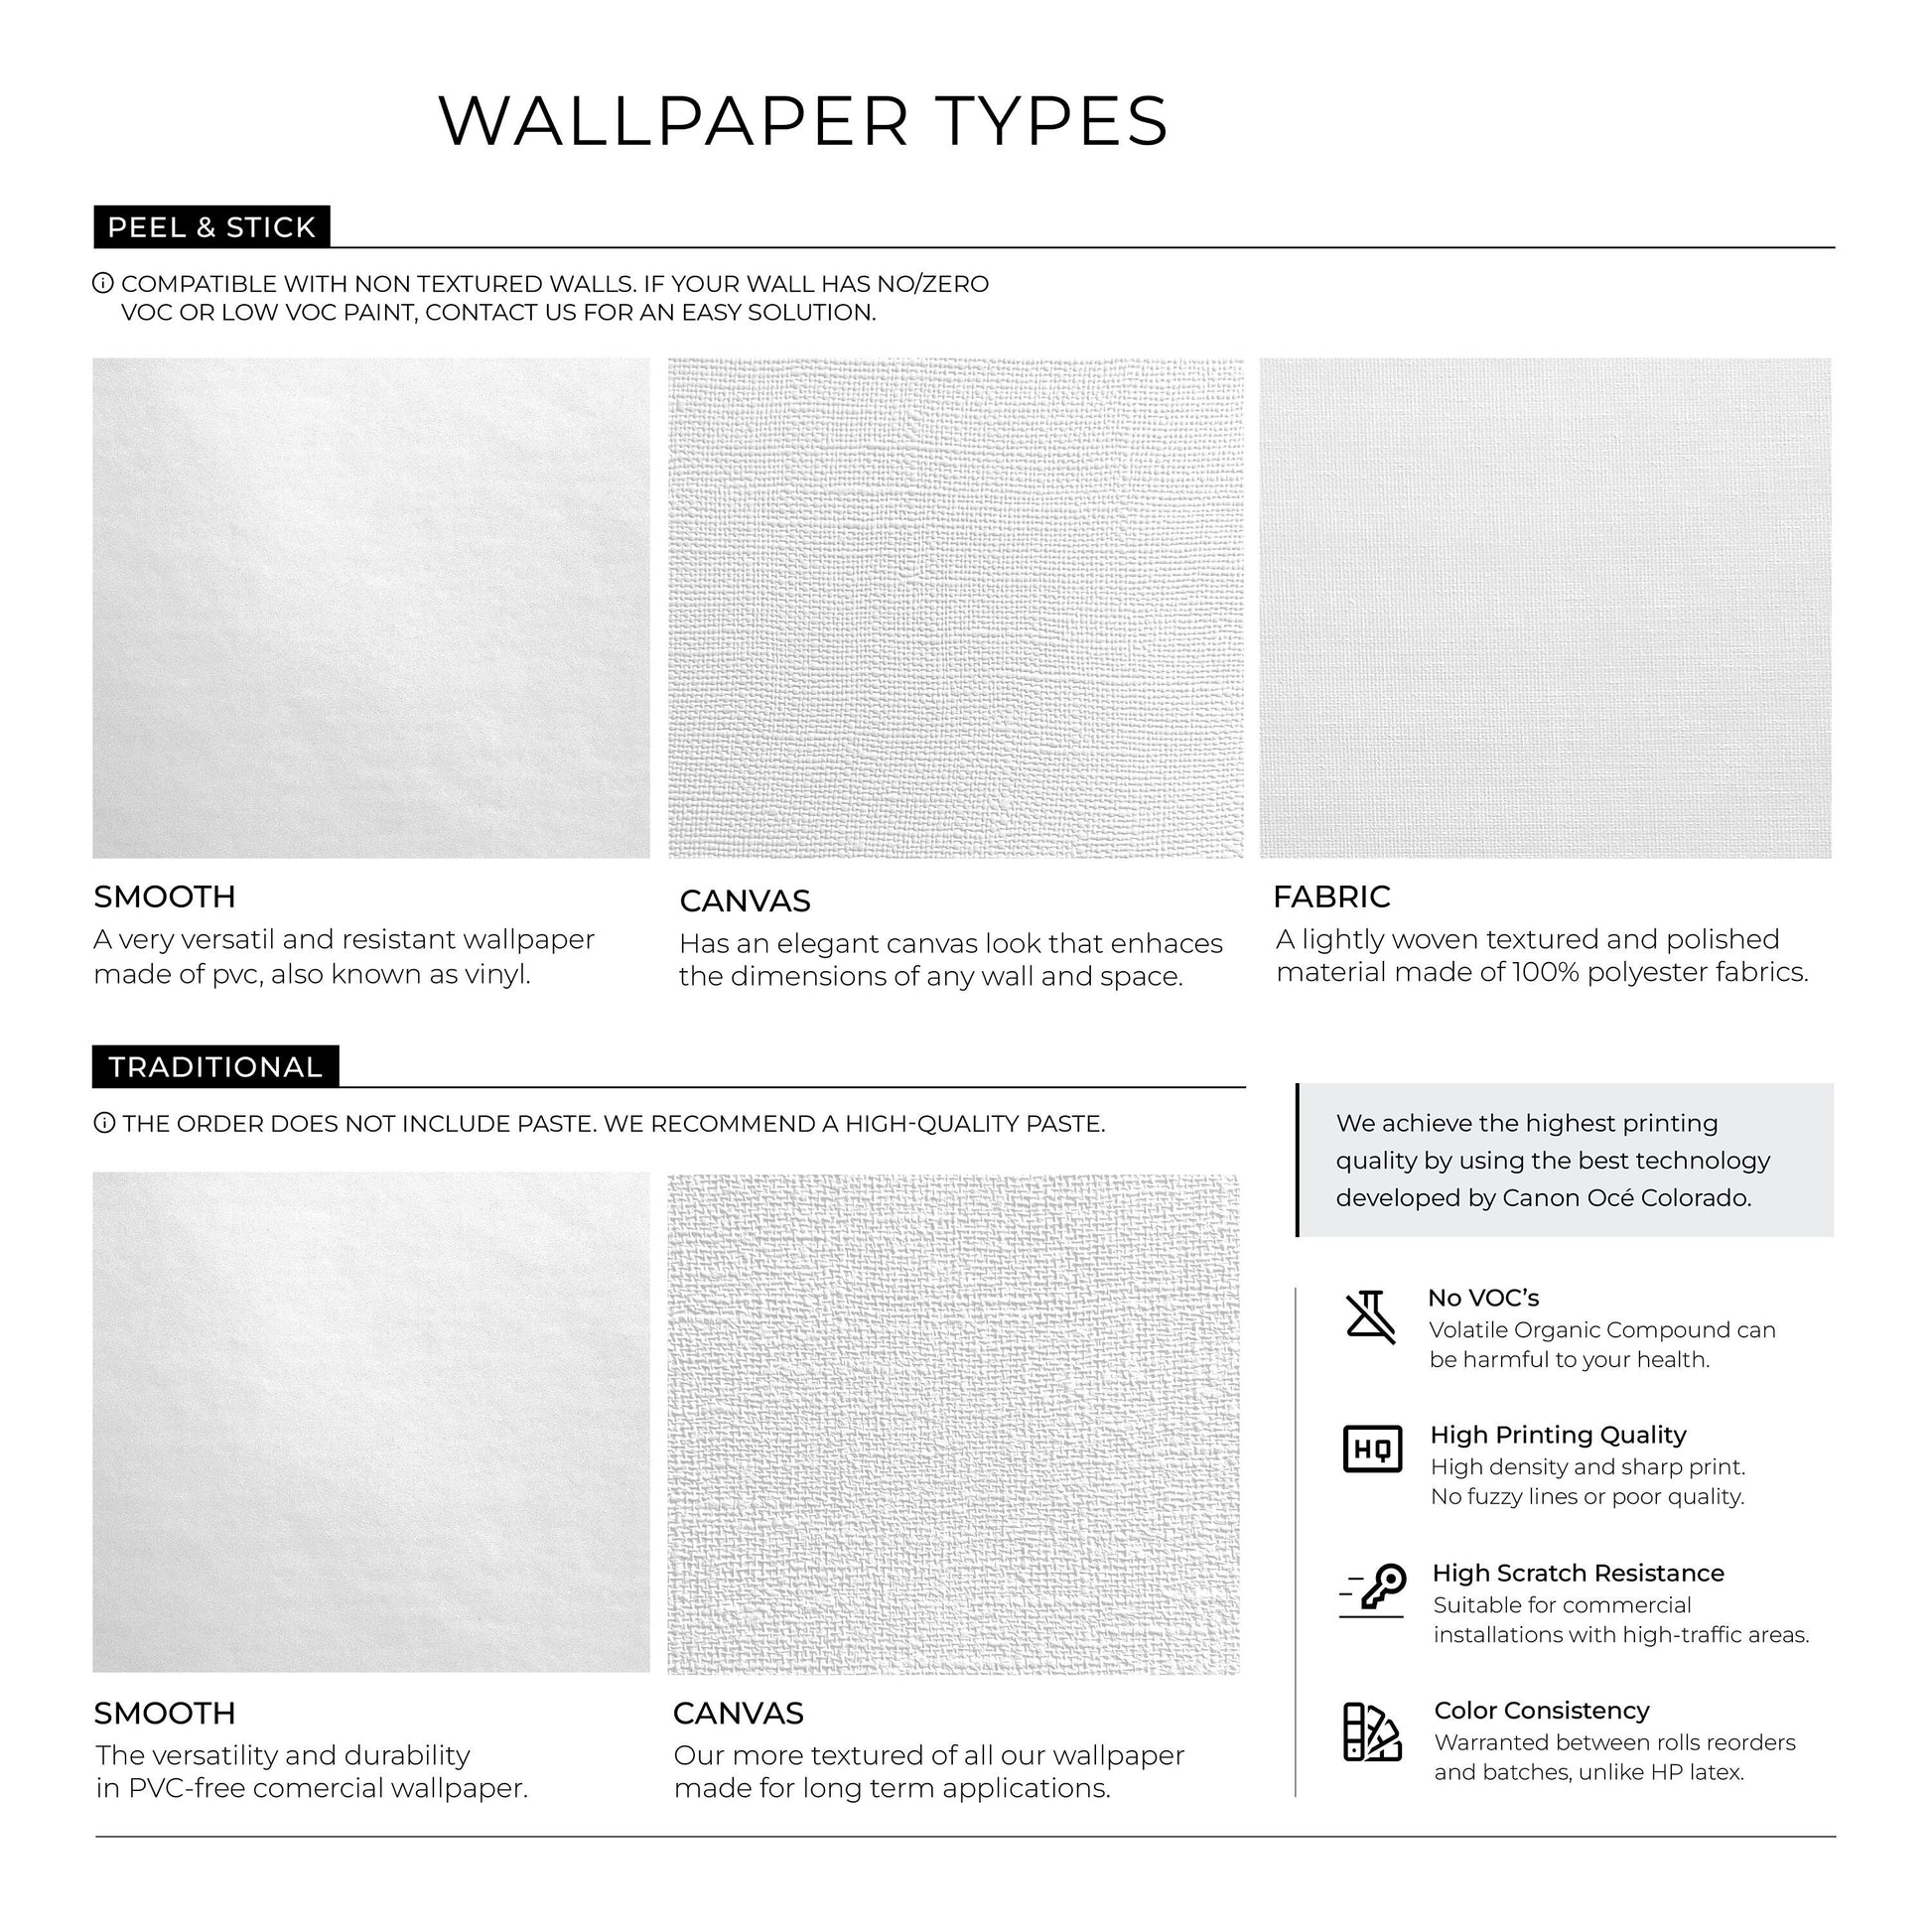 Temporary Wallpaper Peel and Stick Removable Wallpaper Dots Wall Paper Wall - Black and White Wallpaper - C084